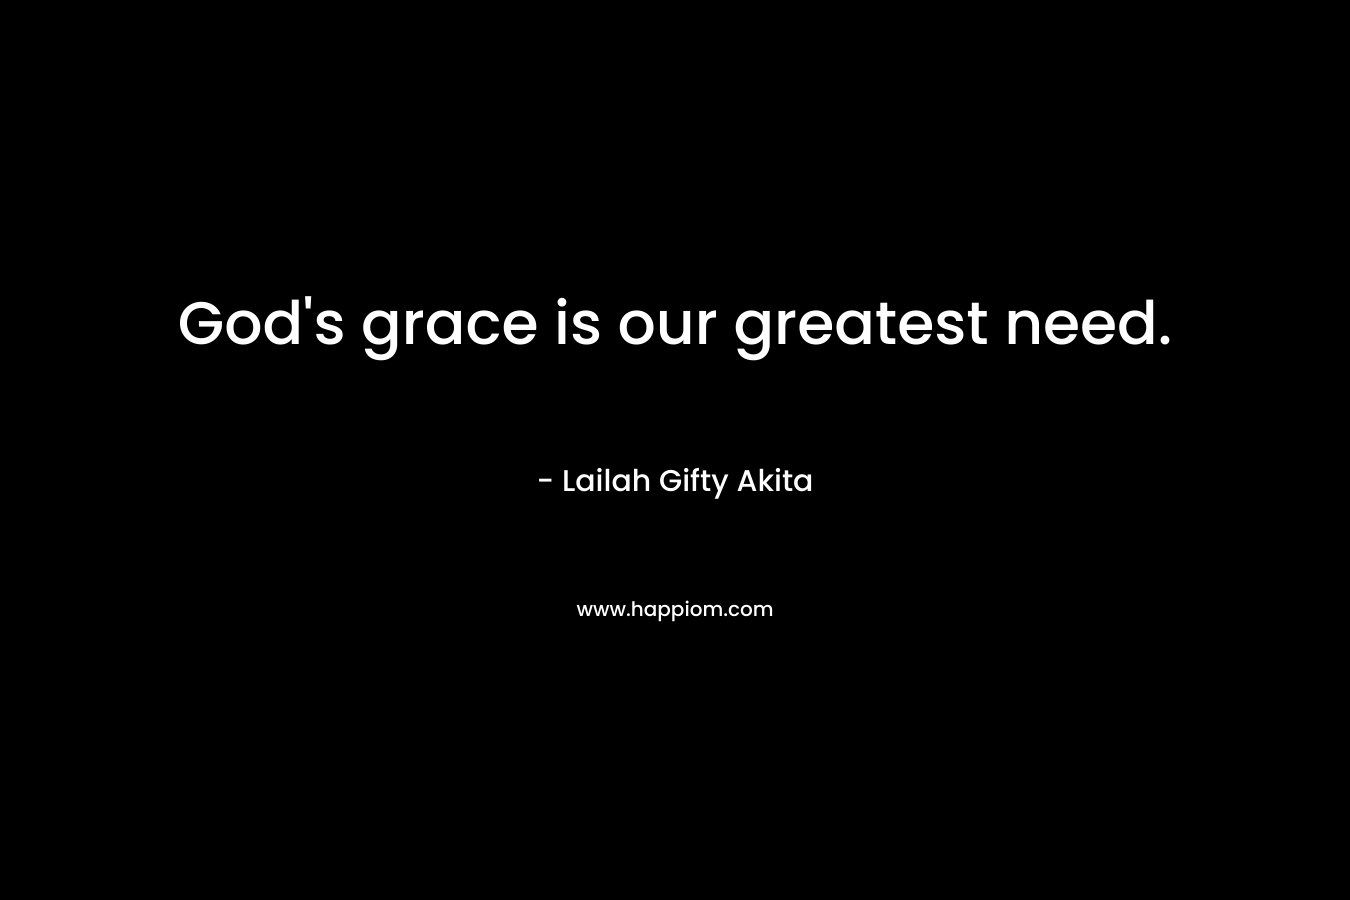 God's grace is our greatest need.